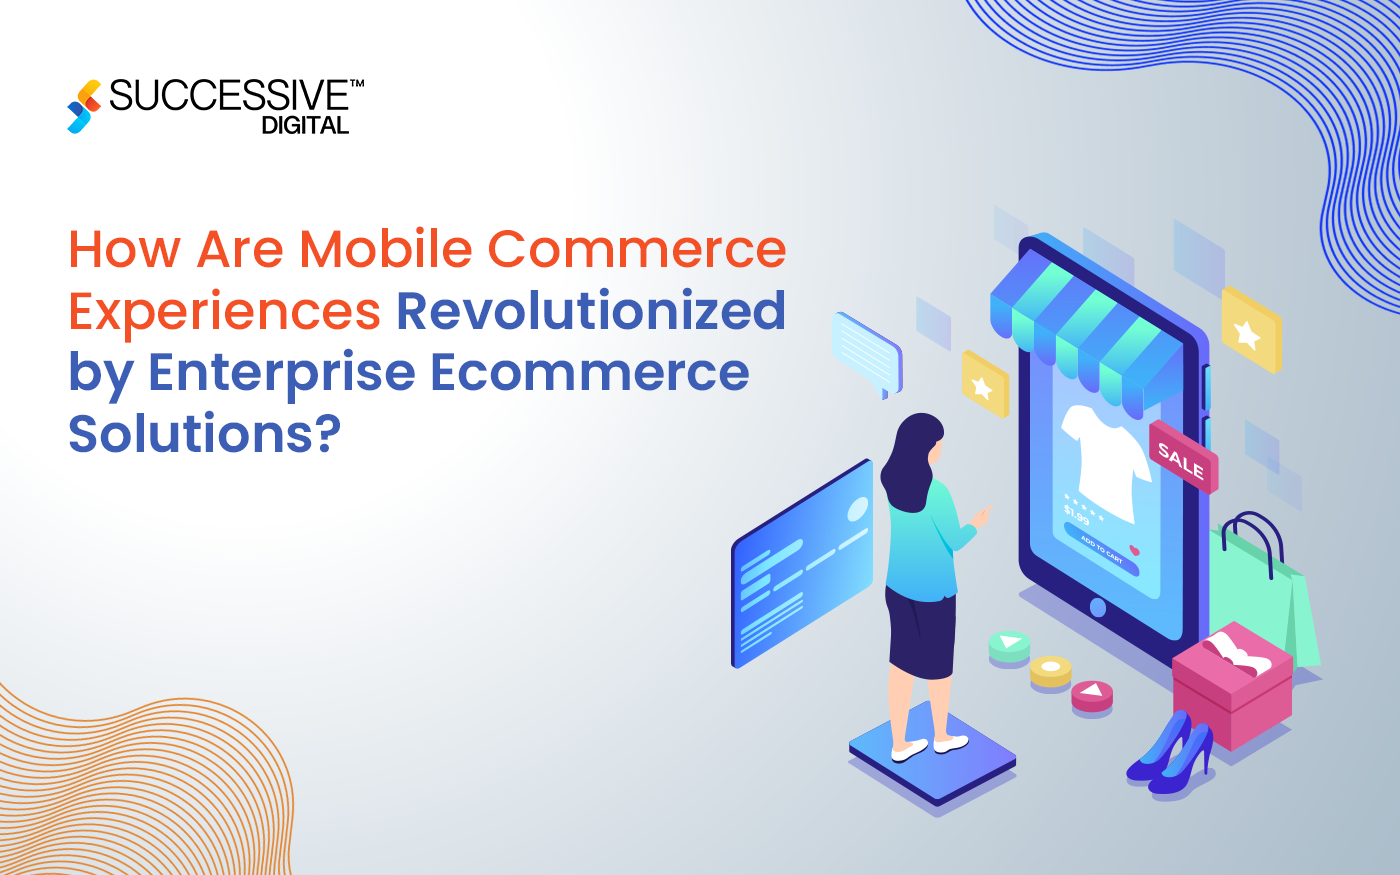 How Are Mobile Commerce Experiences Revolutionized by Enterprise Ecommerce Solutions?